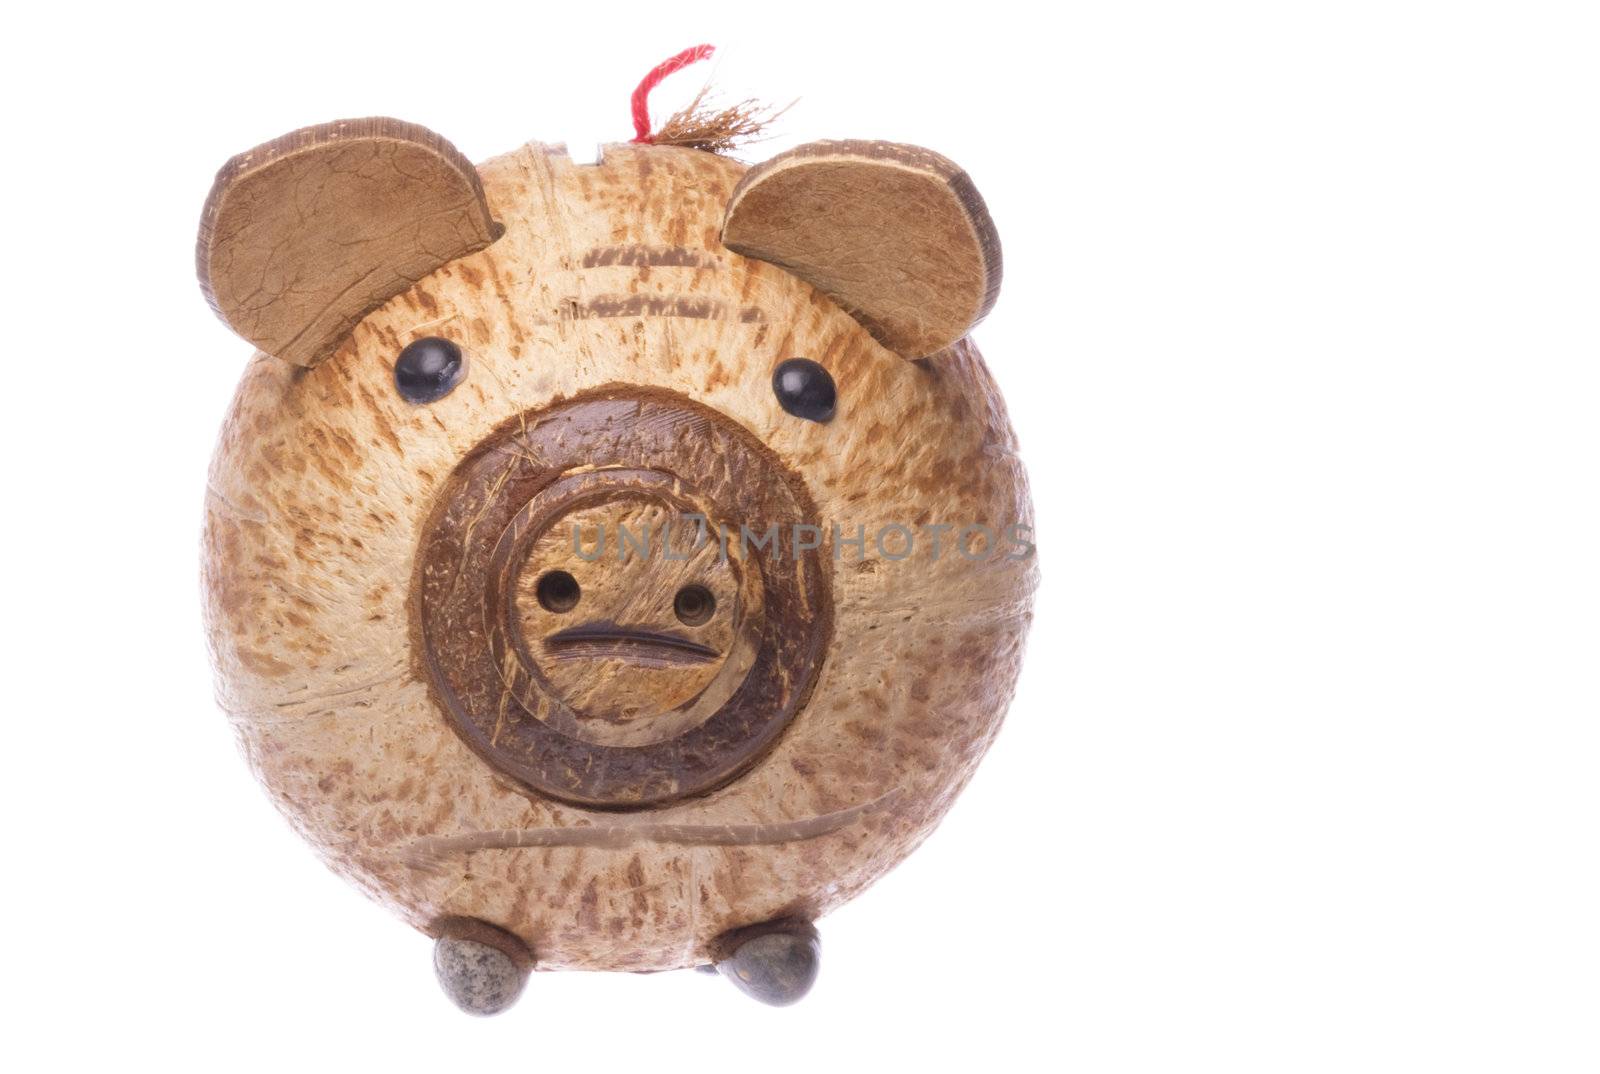 Isolated image of a coconut shell piggy bank.